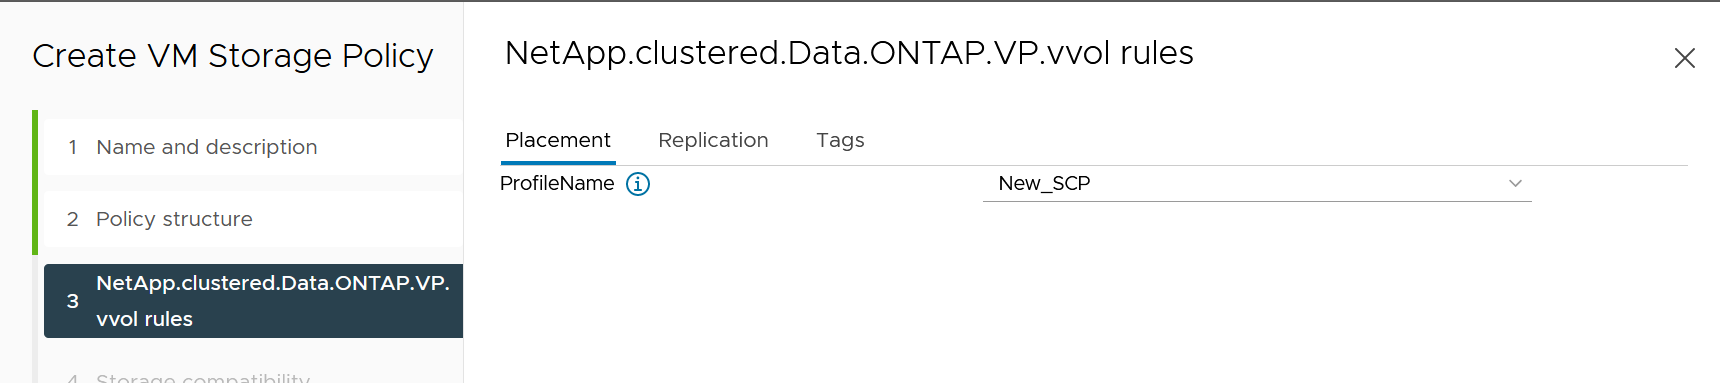 VM Storage Policy creation with ONTAP tools VASA Provider 9.10